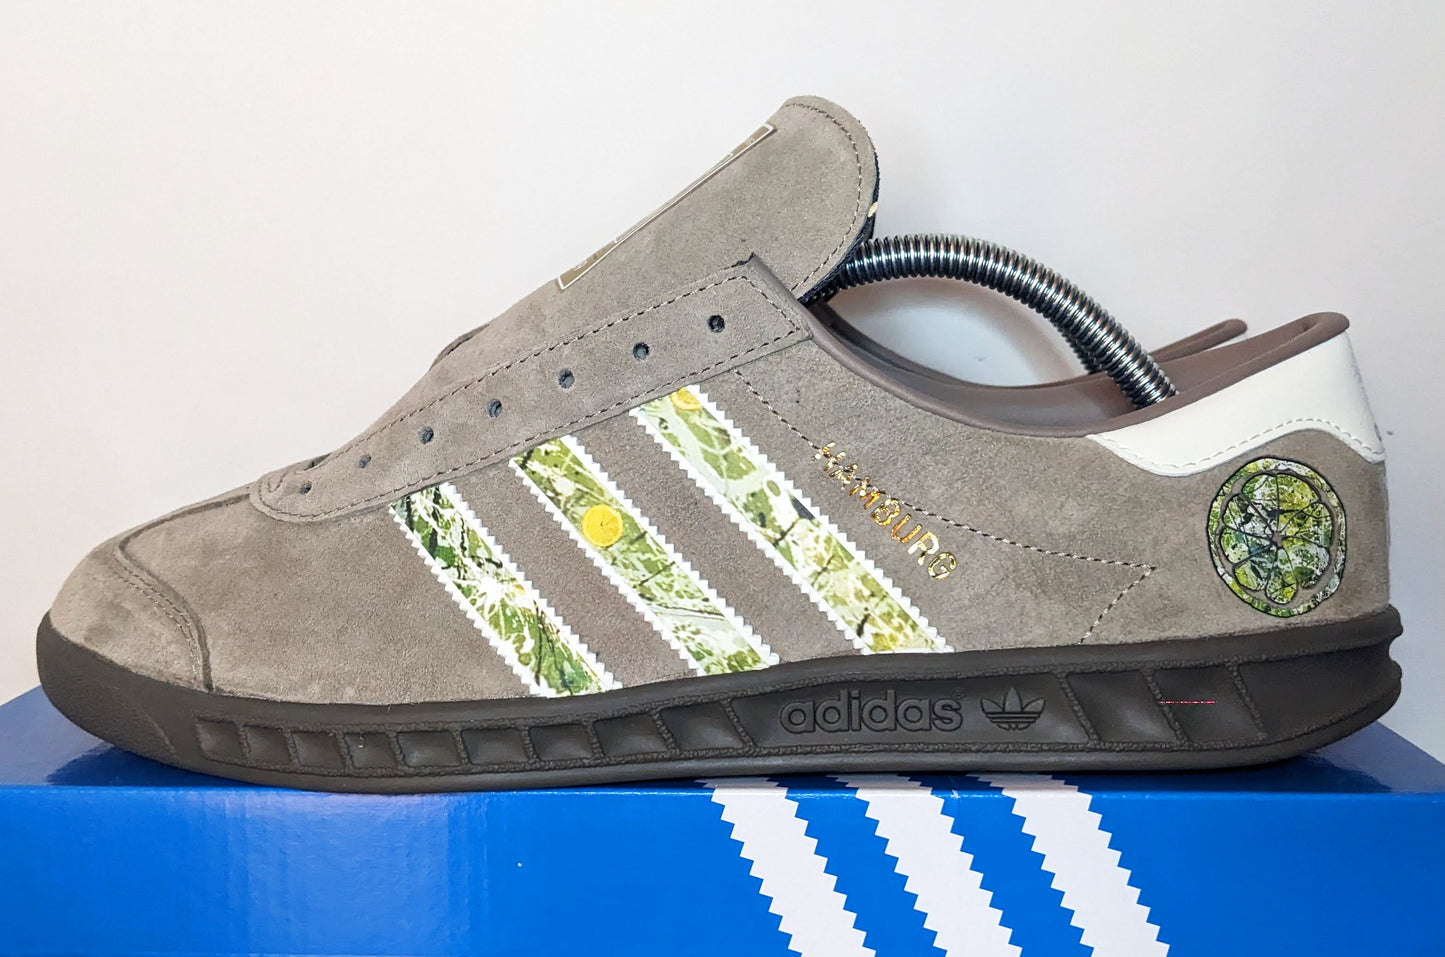 Limited edition The Stone Roses album chalky brown / white suede Adidas custom Hamburg trainers / sneakers